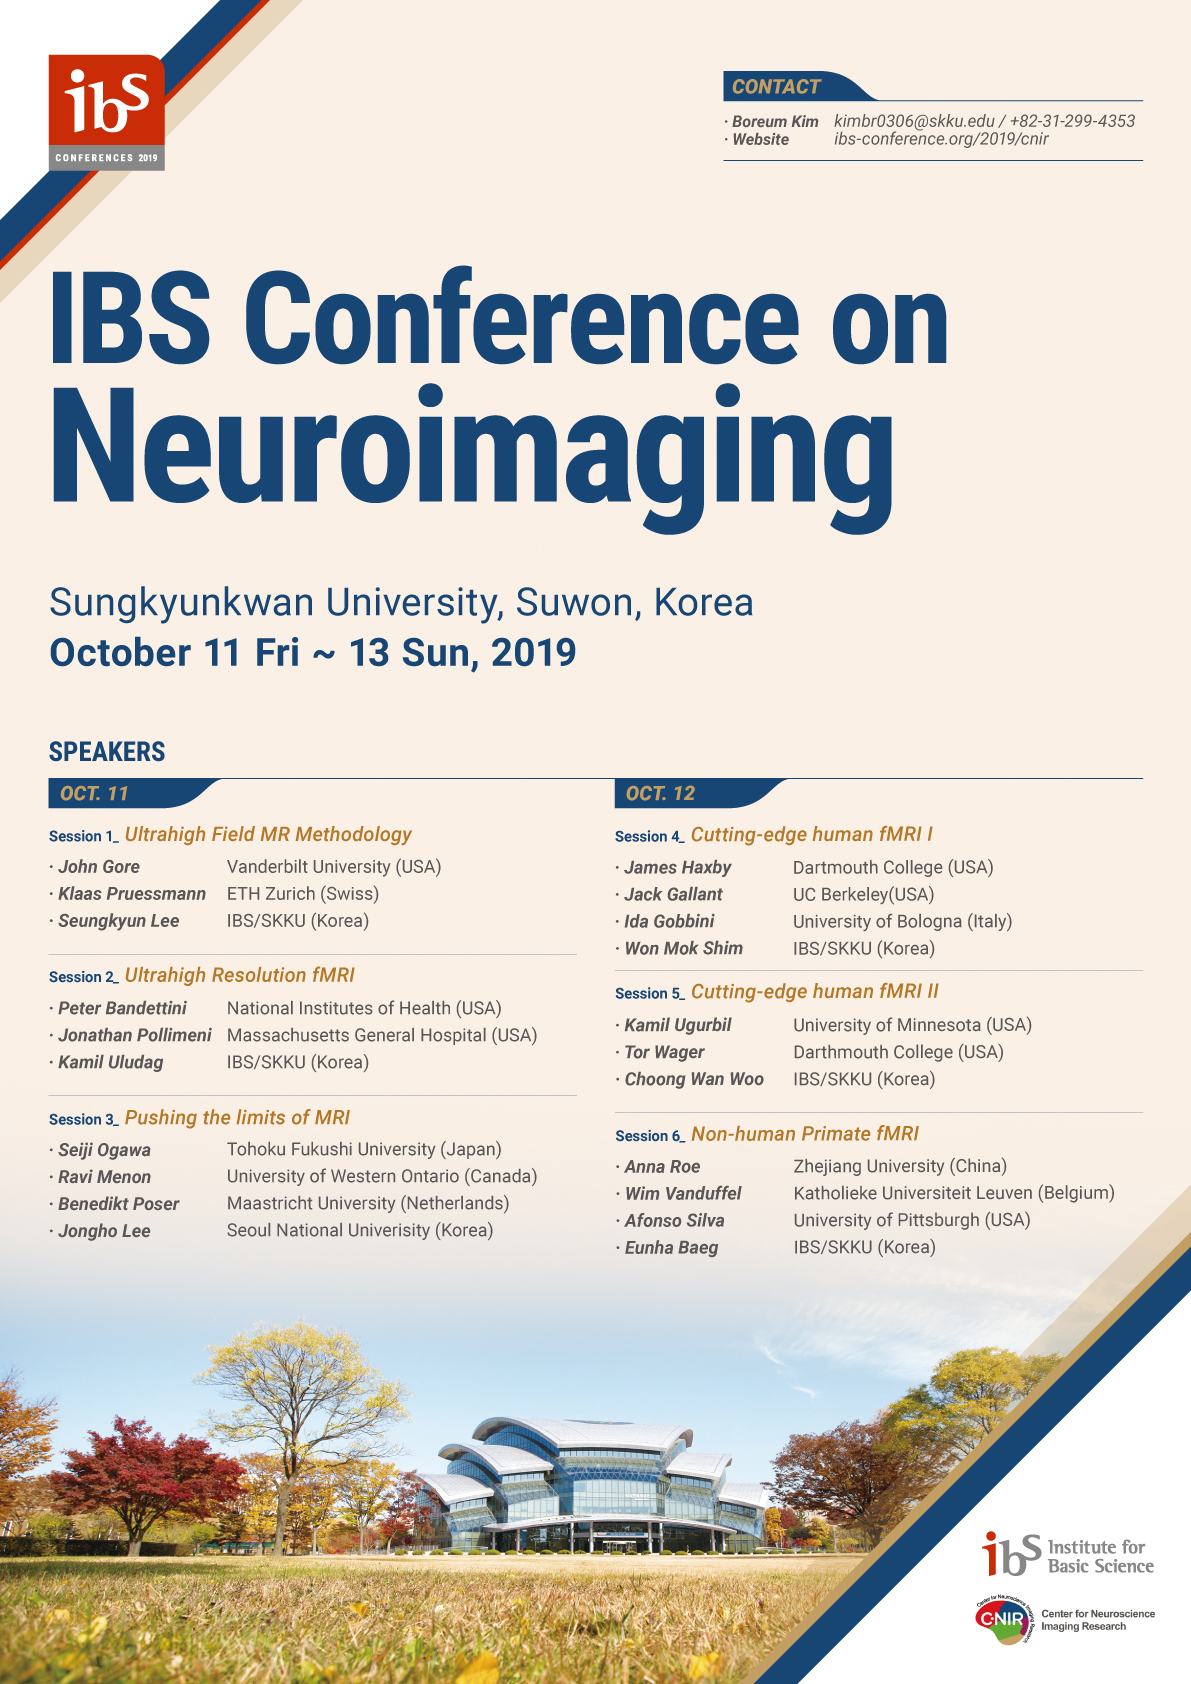 IBS Conference on Neuroimaging